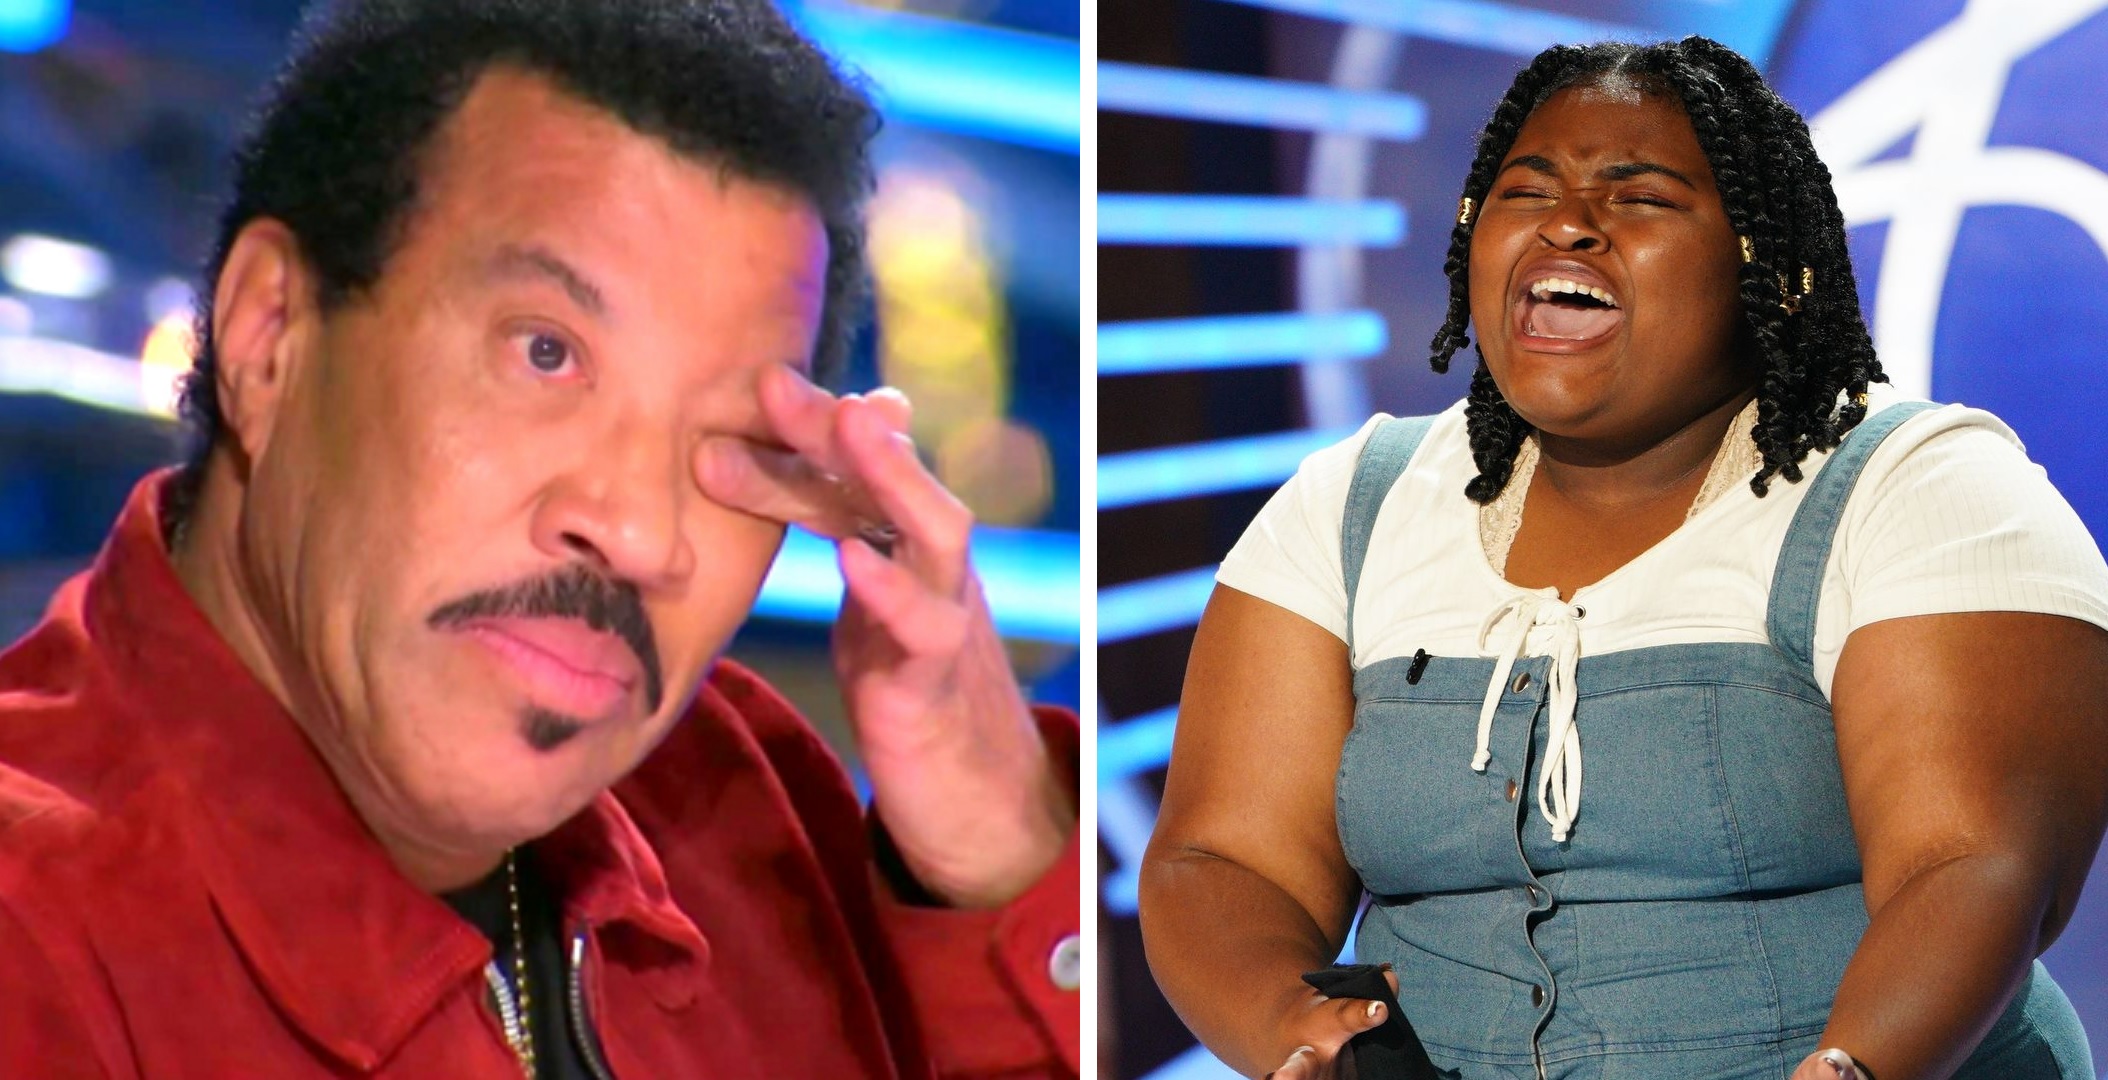 Watch: Lionel Richie Moved To Tears By This Girl’s Audition On American Idol 2021